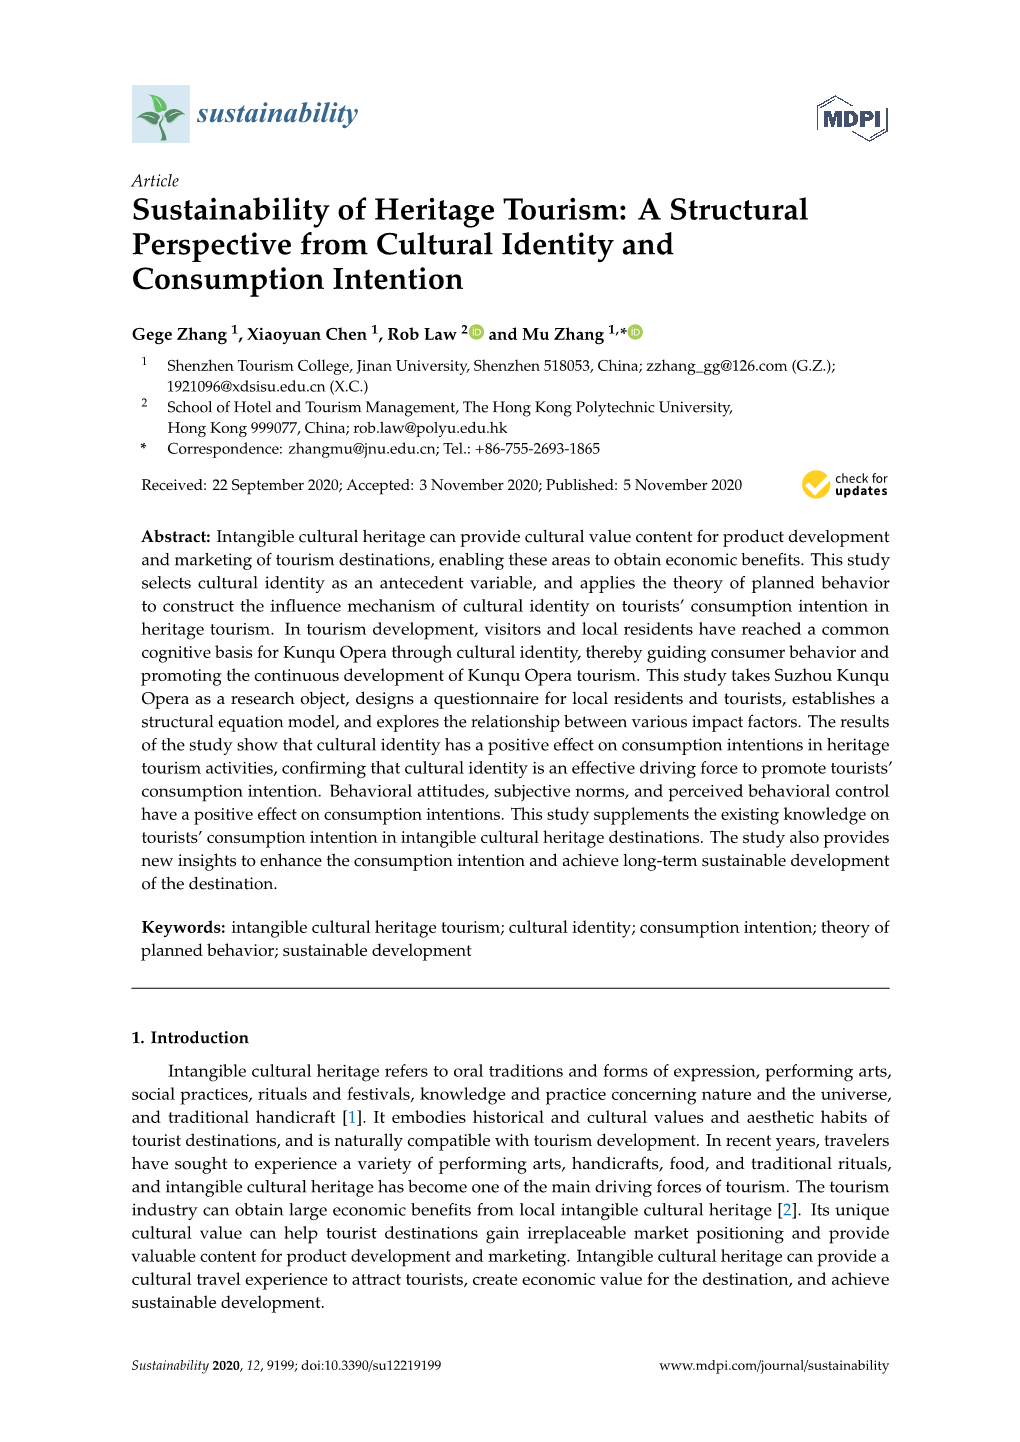 Sustainability of Heritage Tourism: a Structural Perspective from Cultural Identity and Consumption Intention